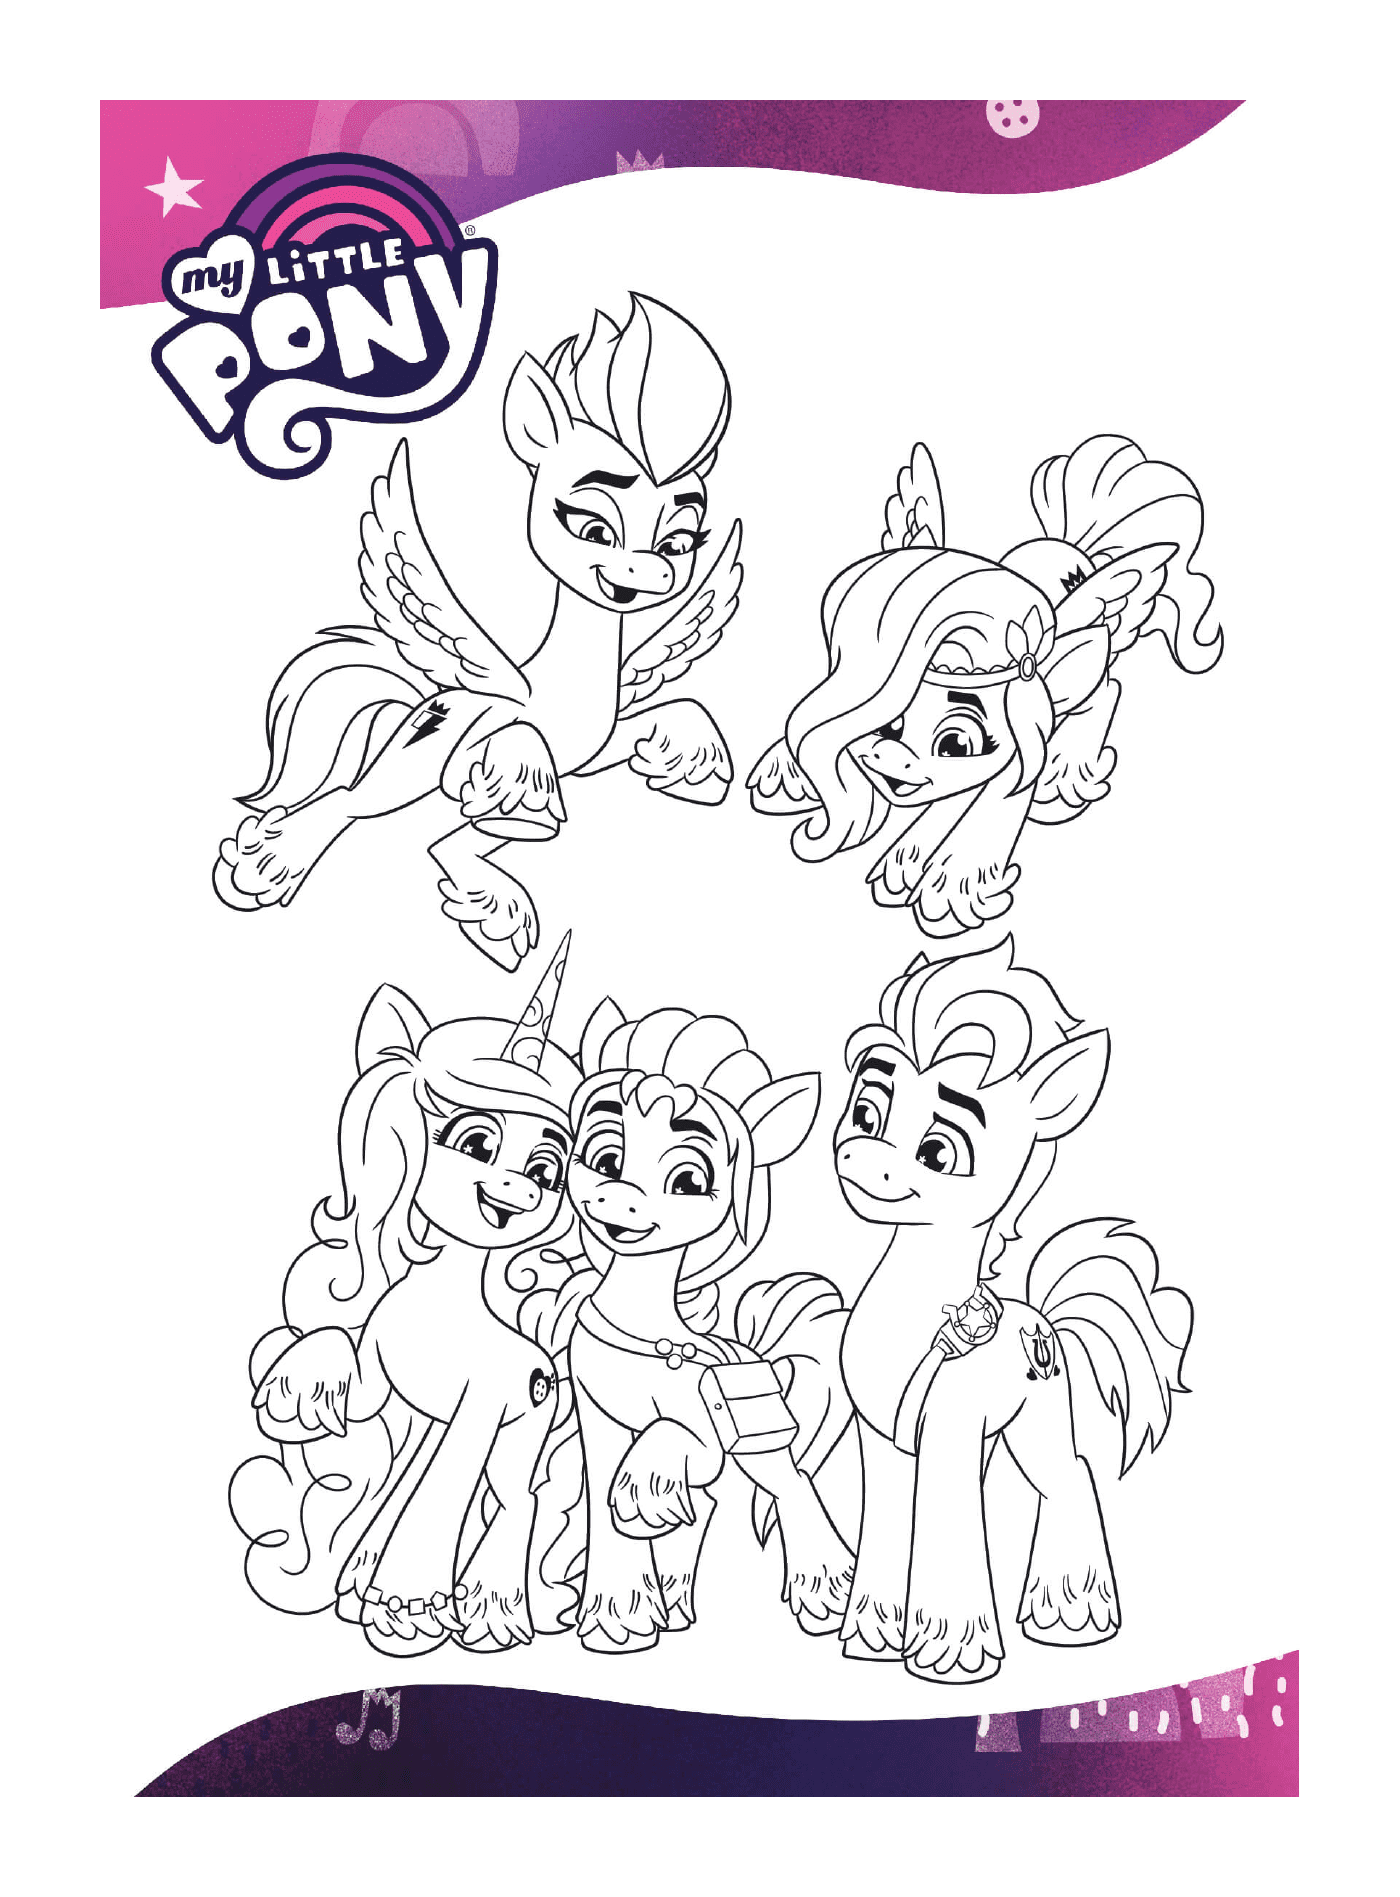  Generation 5 by My Little Pony 